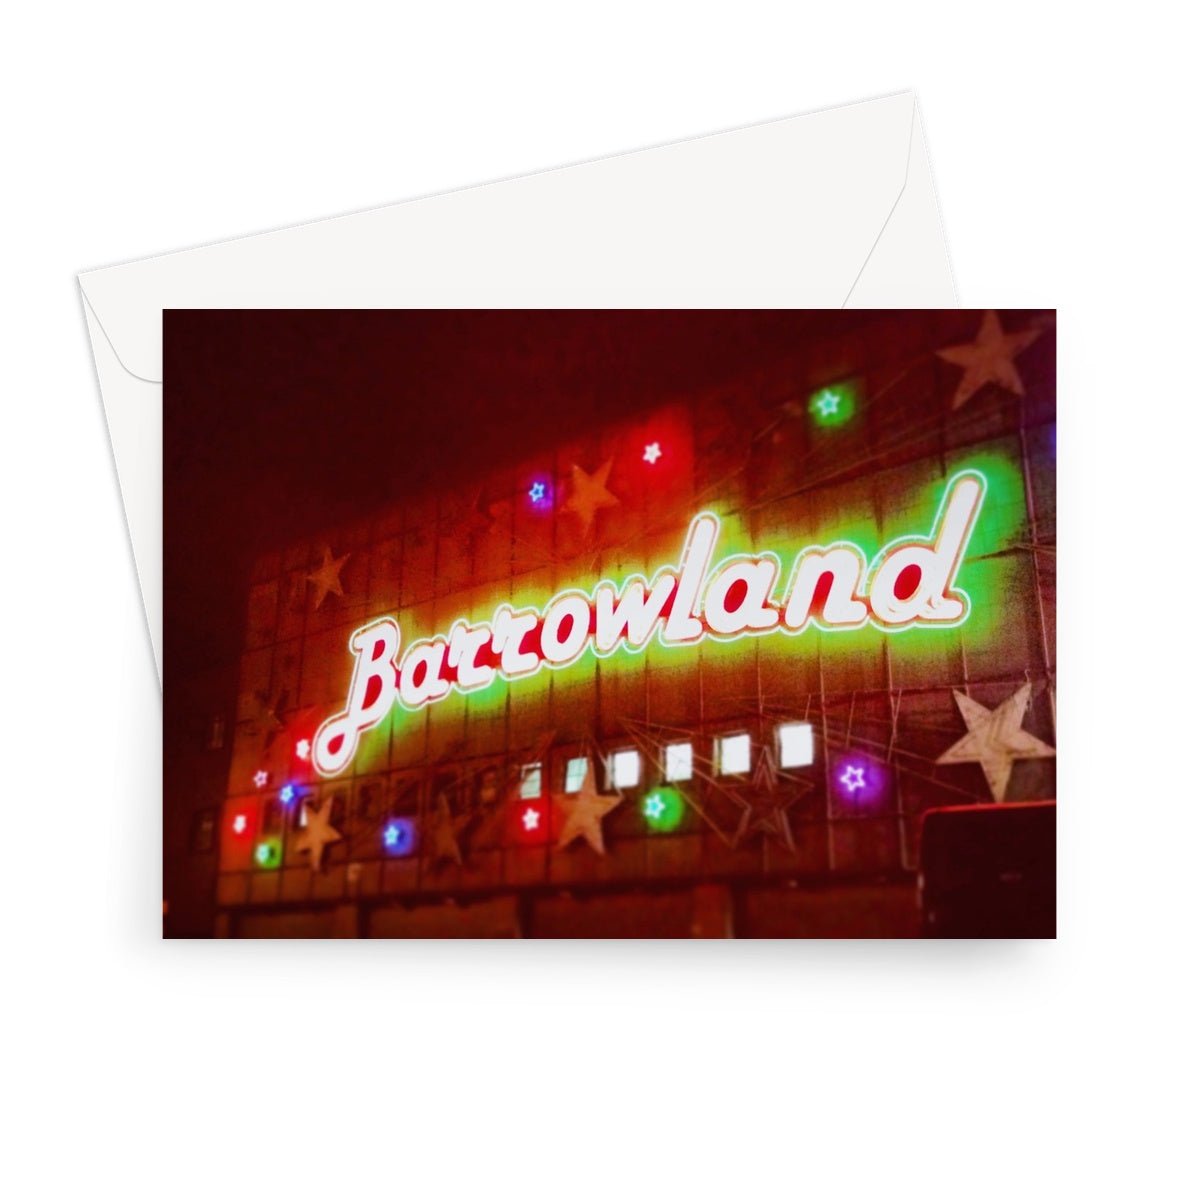 A Neon Glasgow Barrowlands Art Gifts Greeting Card-Greetings Cards-Edinburgh & Glasgow Art Gallery-7"x5"-10 Cards-Paintings, Prints, Homeware, Art Gifts From Scotland By Scottish Artist Kevin Hunter